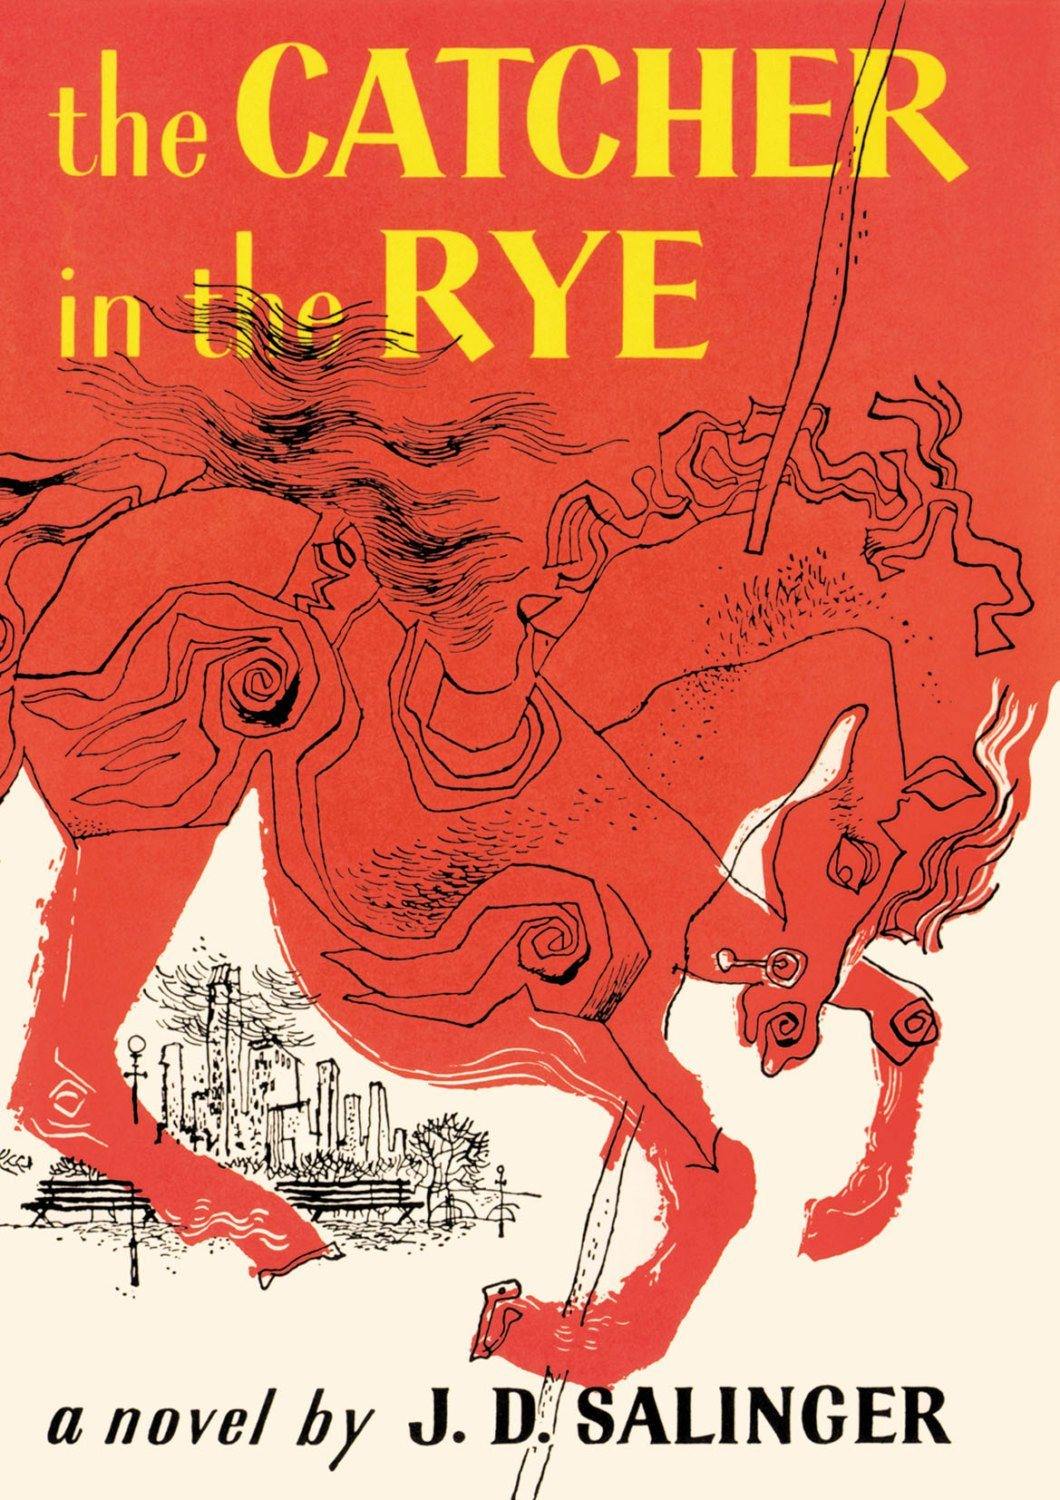 CATCHER IN THE RYE PRINT: Vintage Book Cover Poster Art - Pimlico Prints